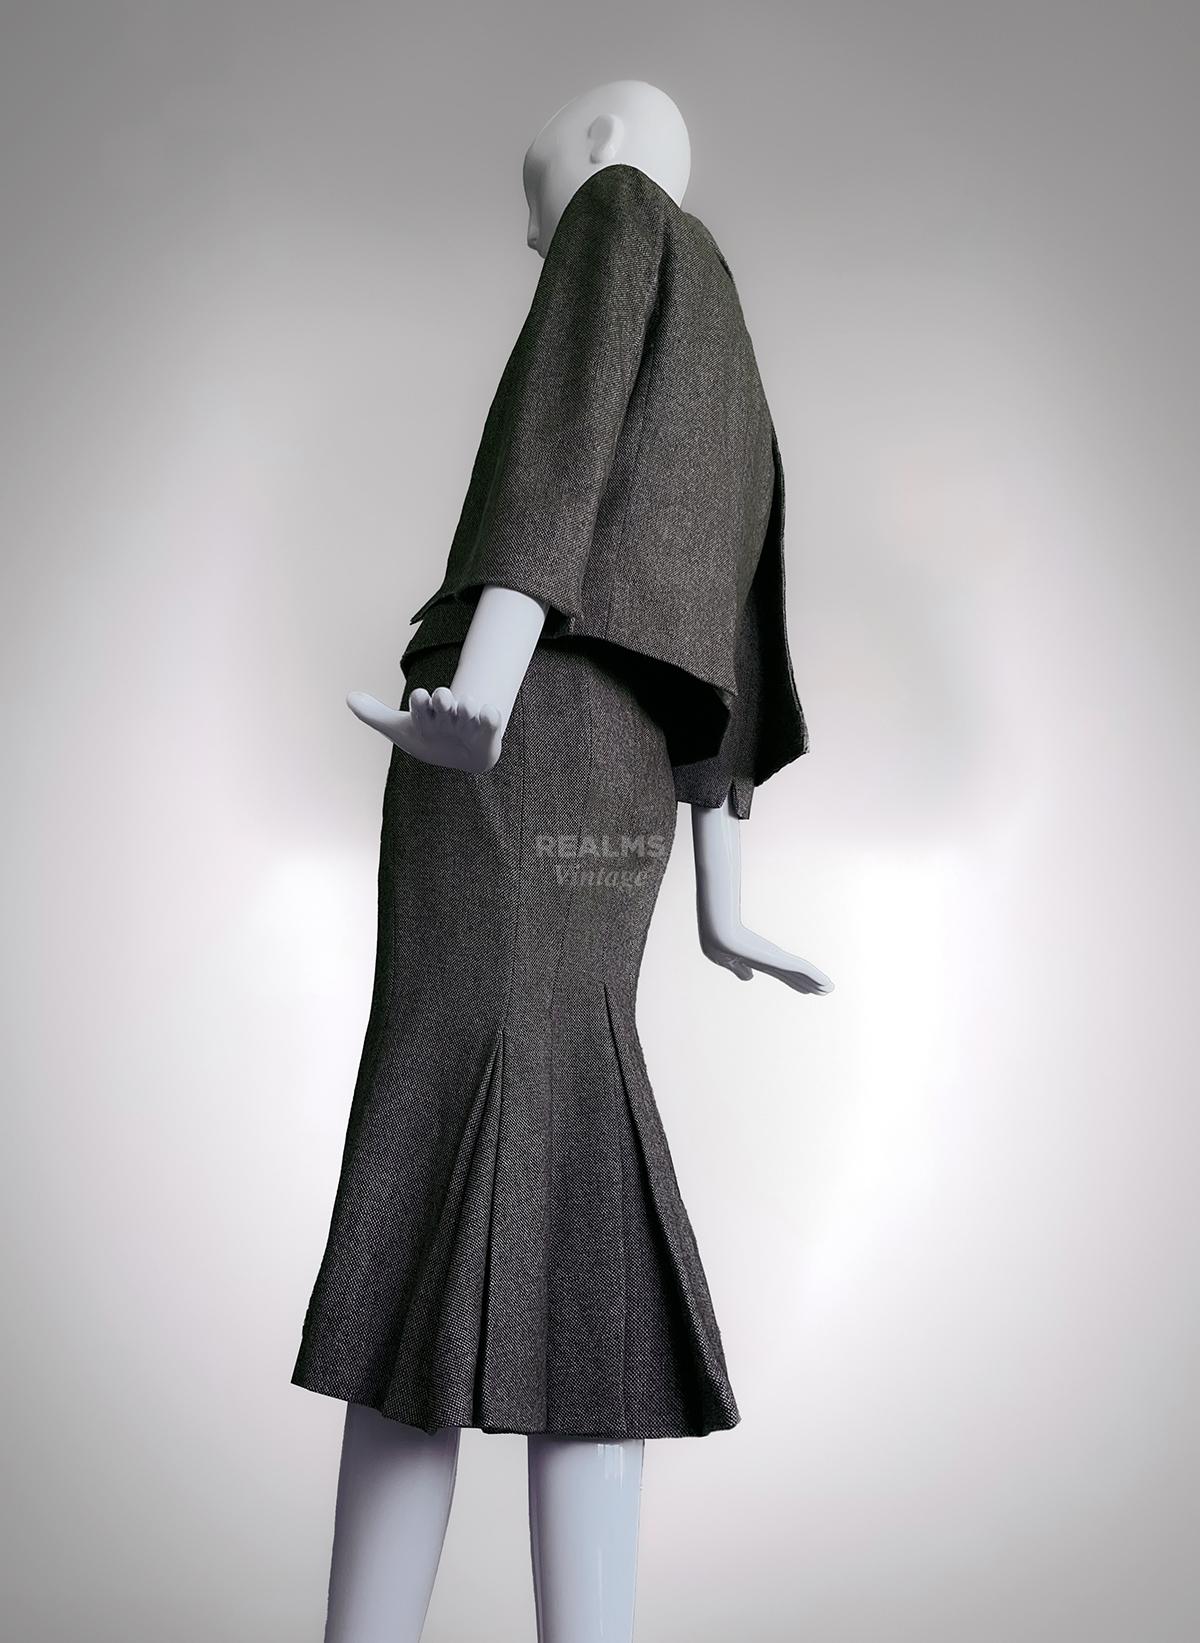 Alexander McQueen Archival FW 2005 'The Man Who Knew Too Much' Wool Skirt Suit For Sale 6